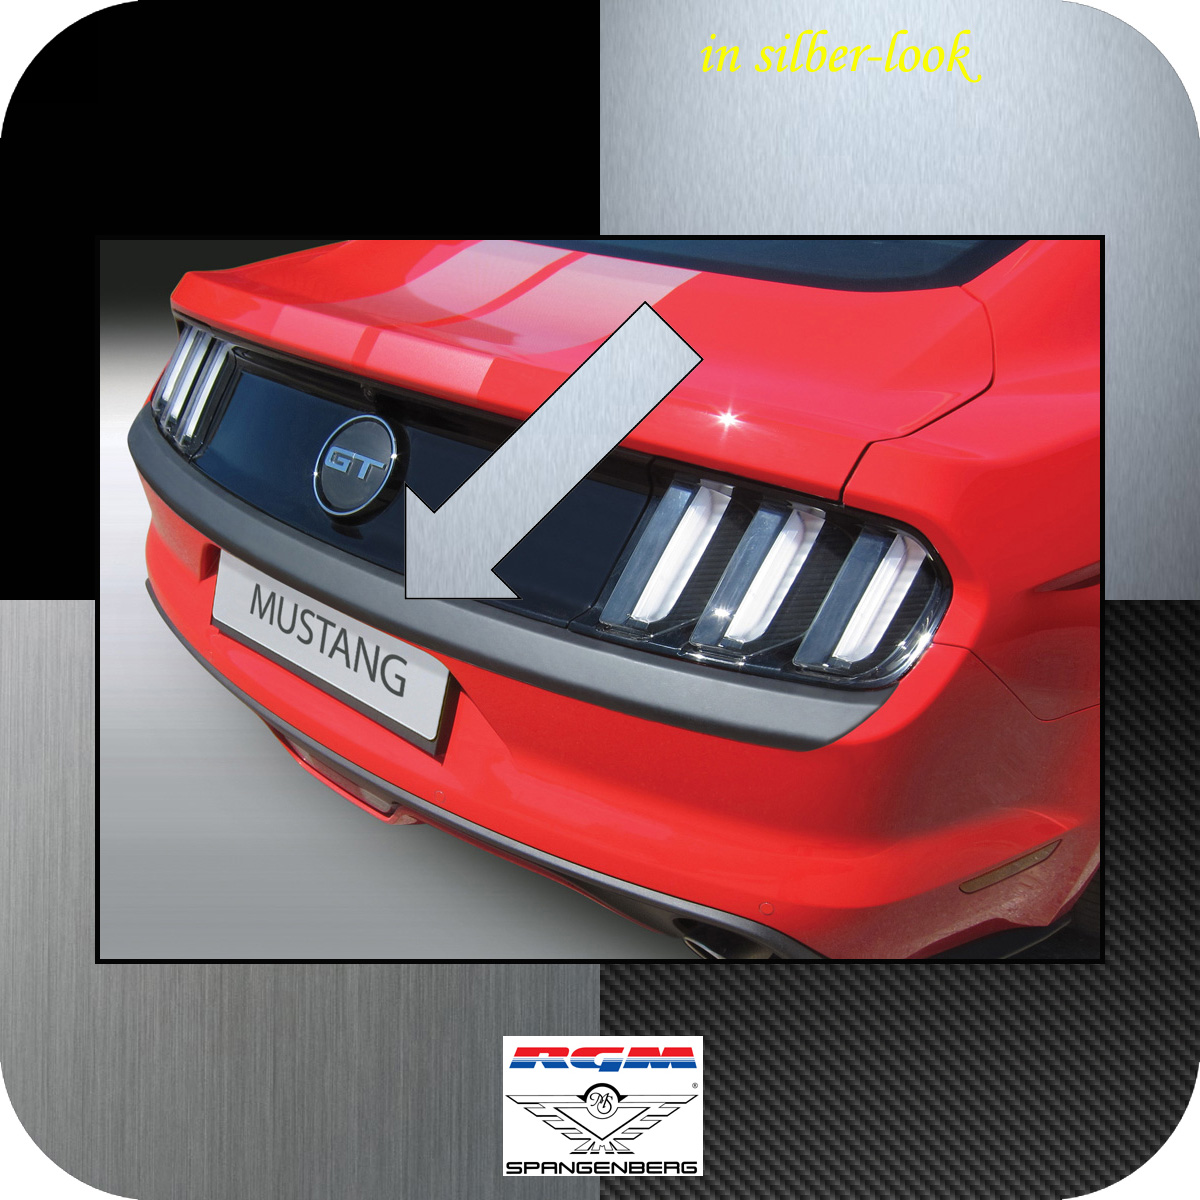 Ladekantenschutz Silber-Look lang Ford Mustang VI Coupe & Cabrio 2015-17 3506668